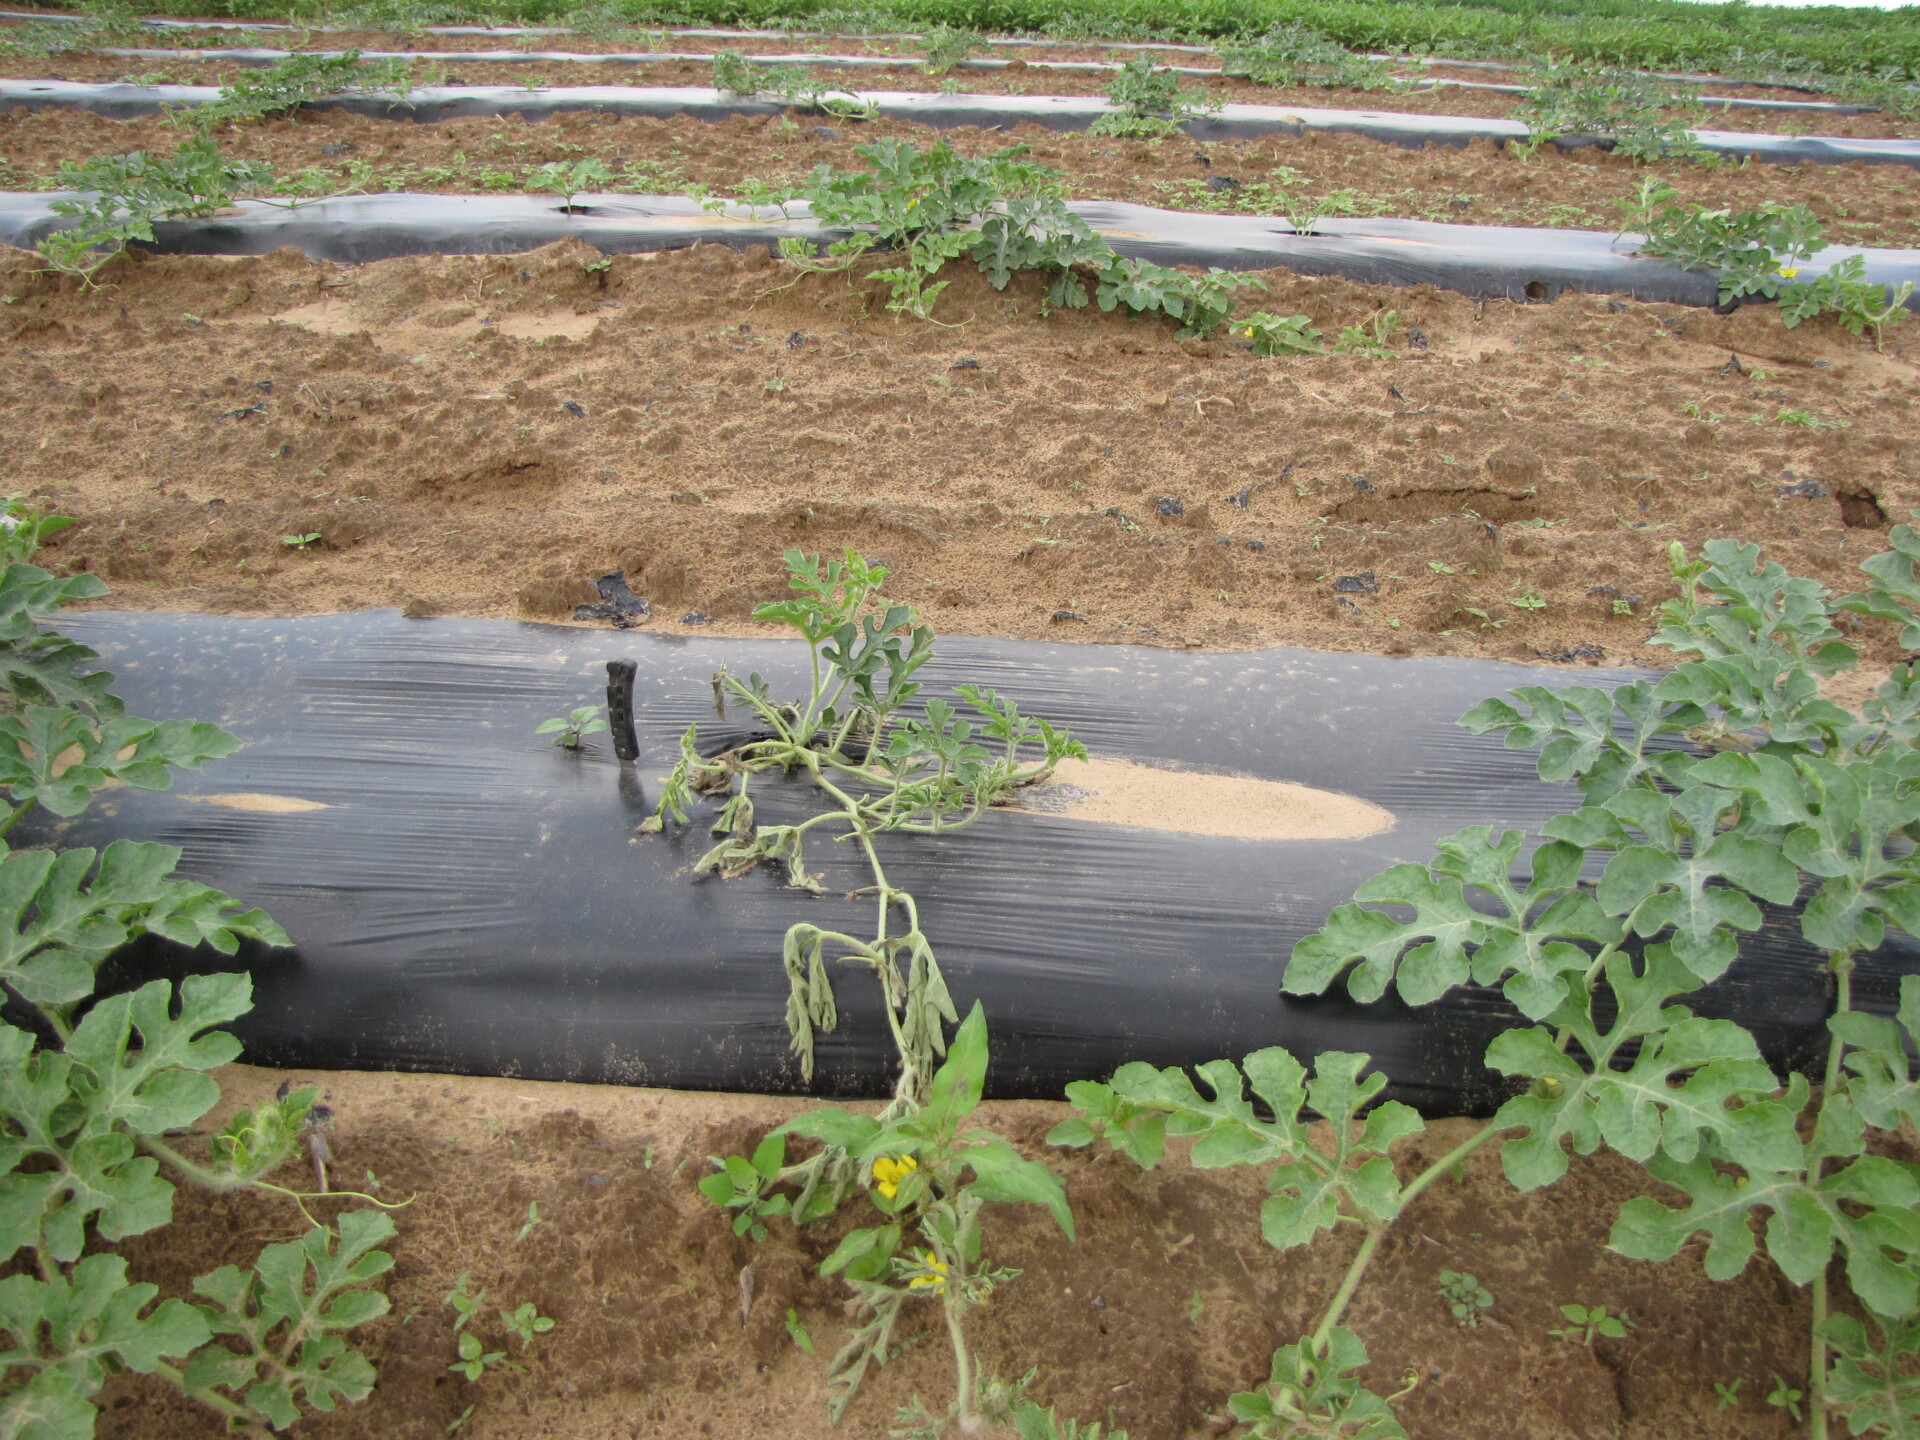 Figure 1. The symptoms of wilt in this watermelon could be from many causes. Black root rot can cause wilt such as seen here.